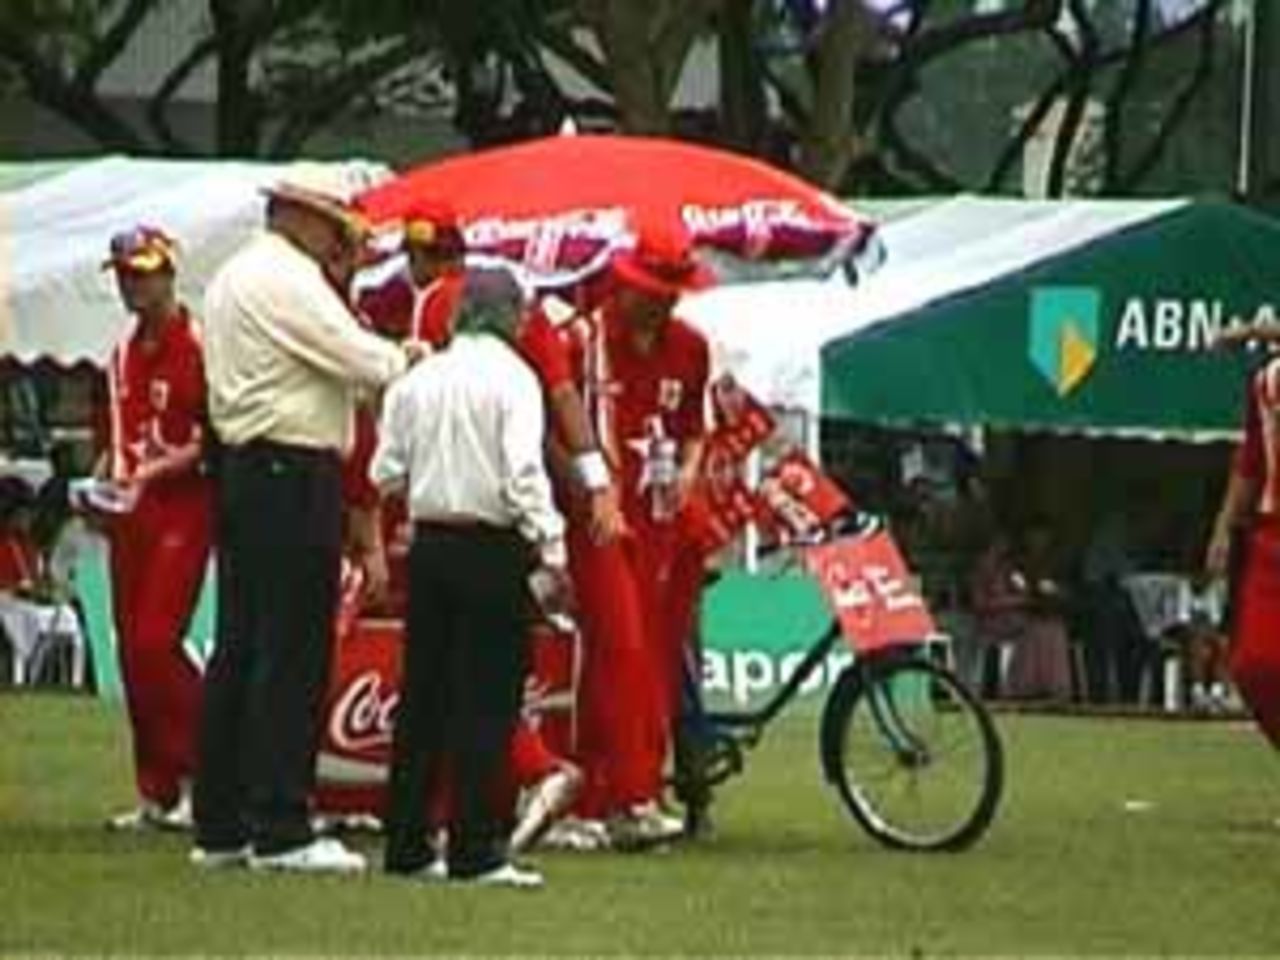 A welcome drinks break to the Zimbabweans amidst Indian run riot, India v Zimbabwe (2nd ODI), Coca-Cola Singapore Challenge, 1999-2000, Kallang Ground, Singapore, 4 Sep 1999.